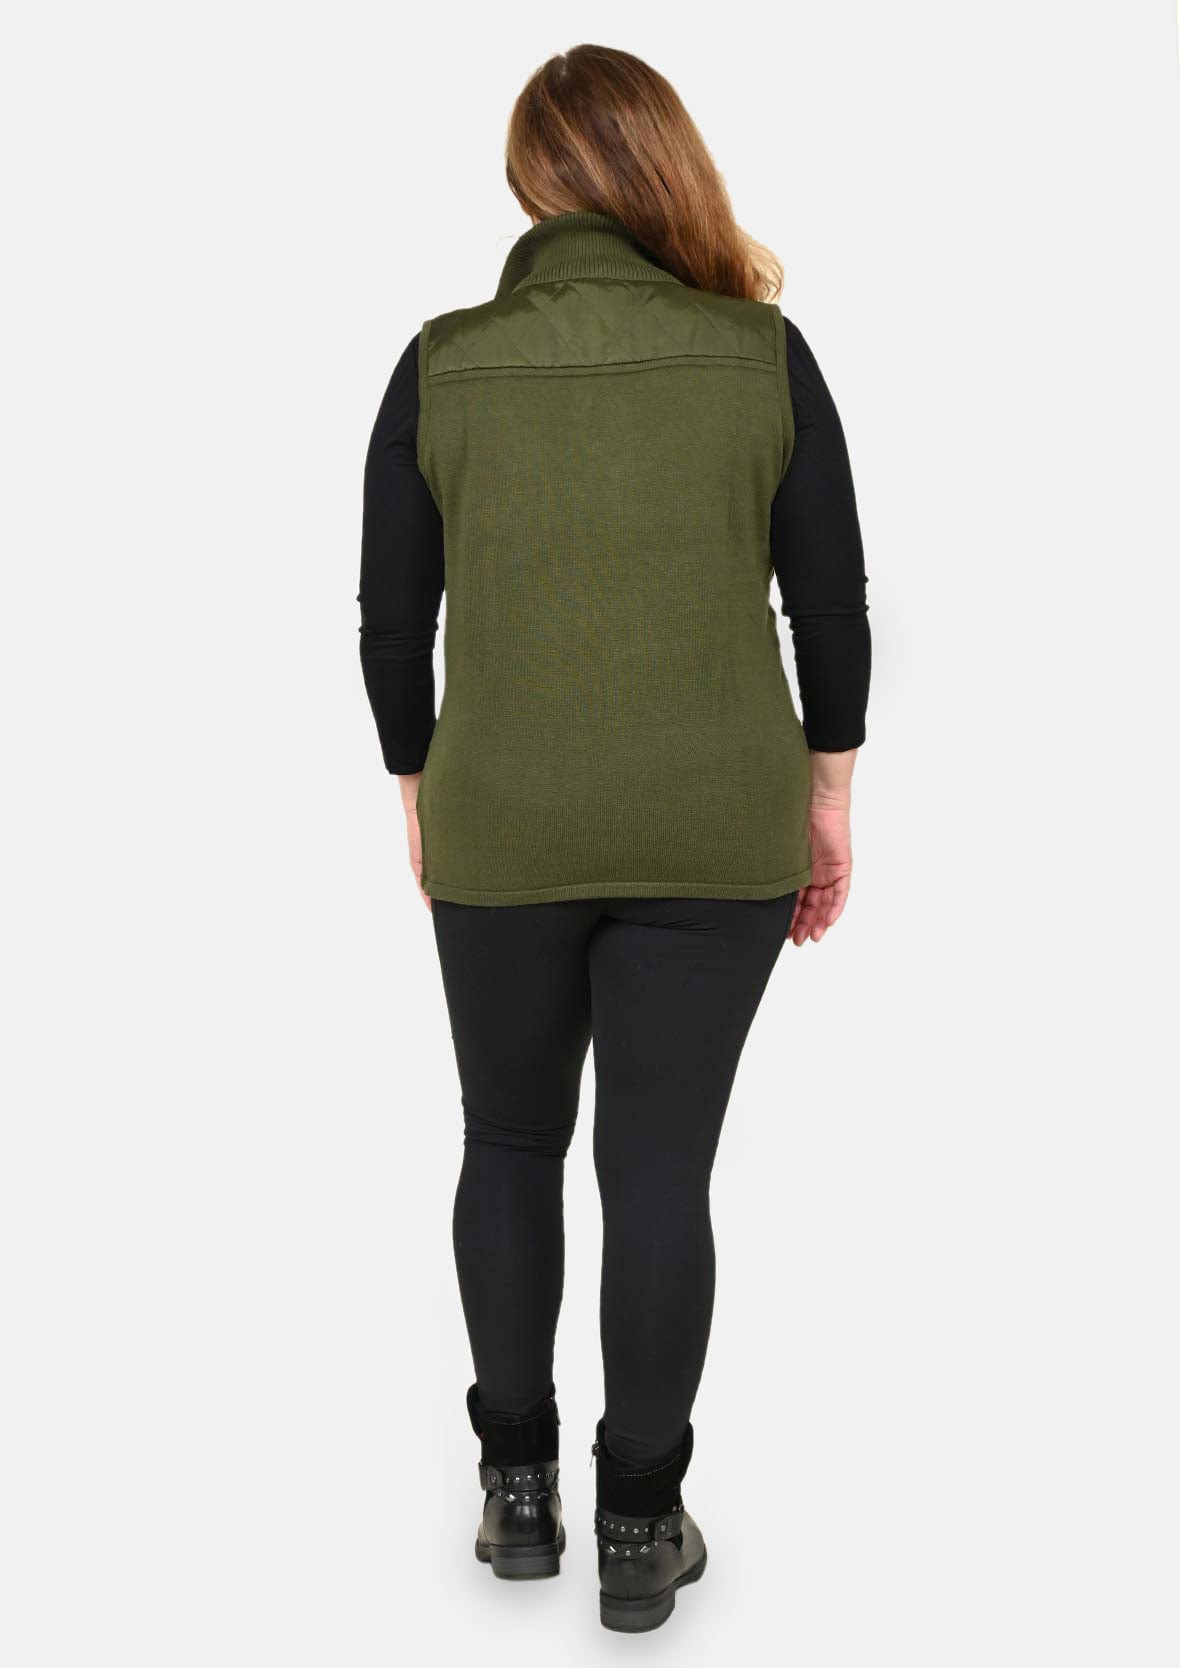 back side of sleeveless knit olive vest with quilted pattern #color_Dark Olive